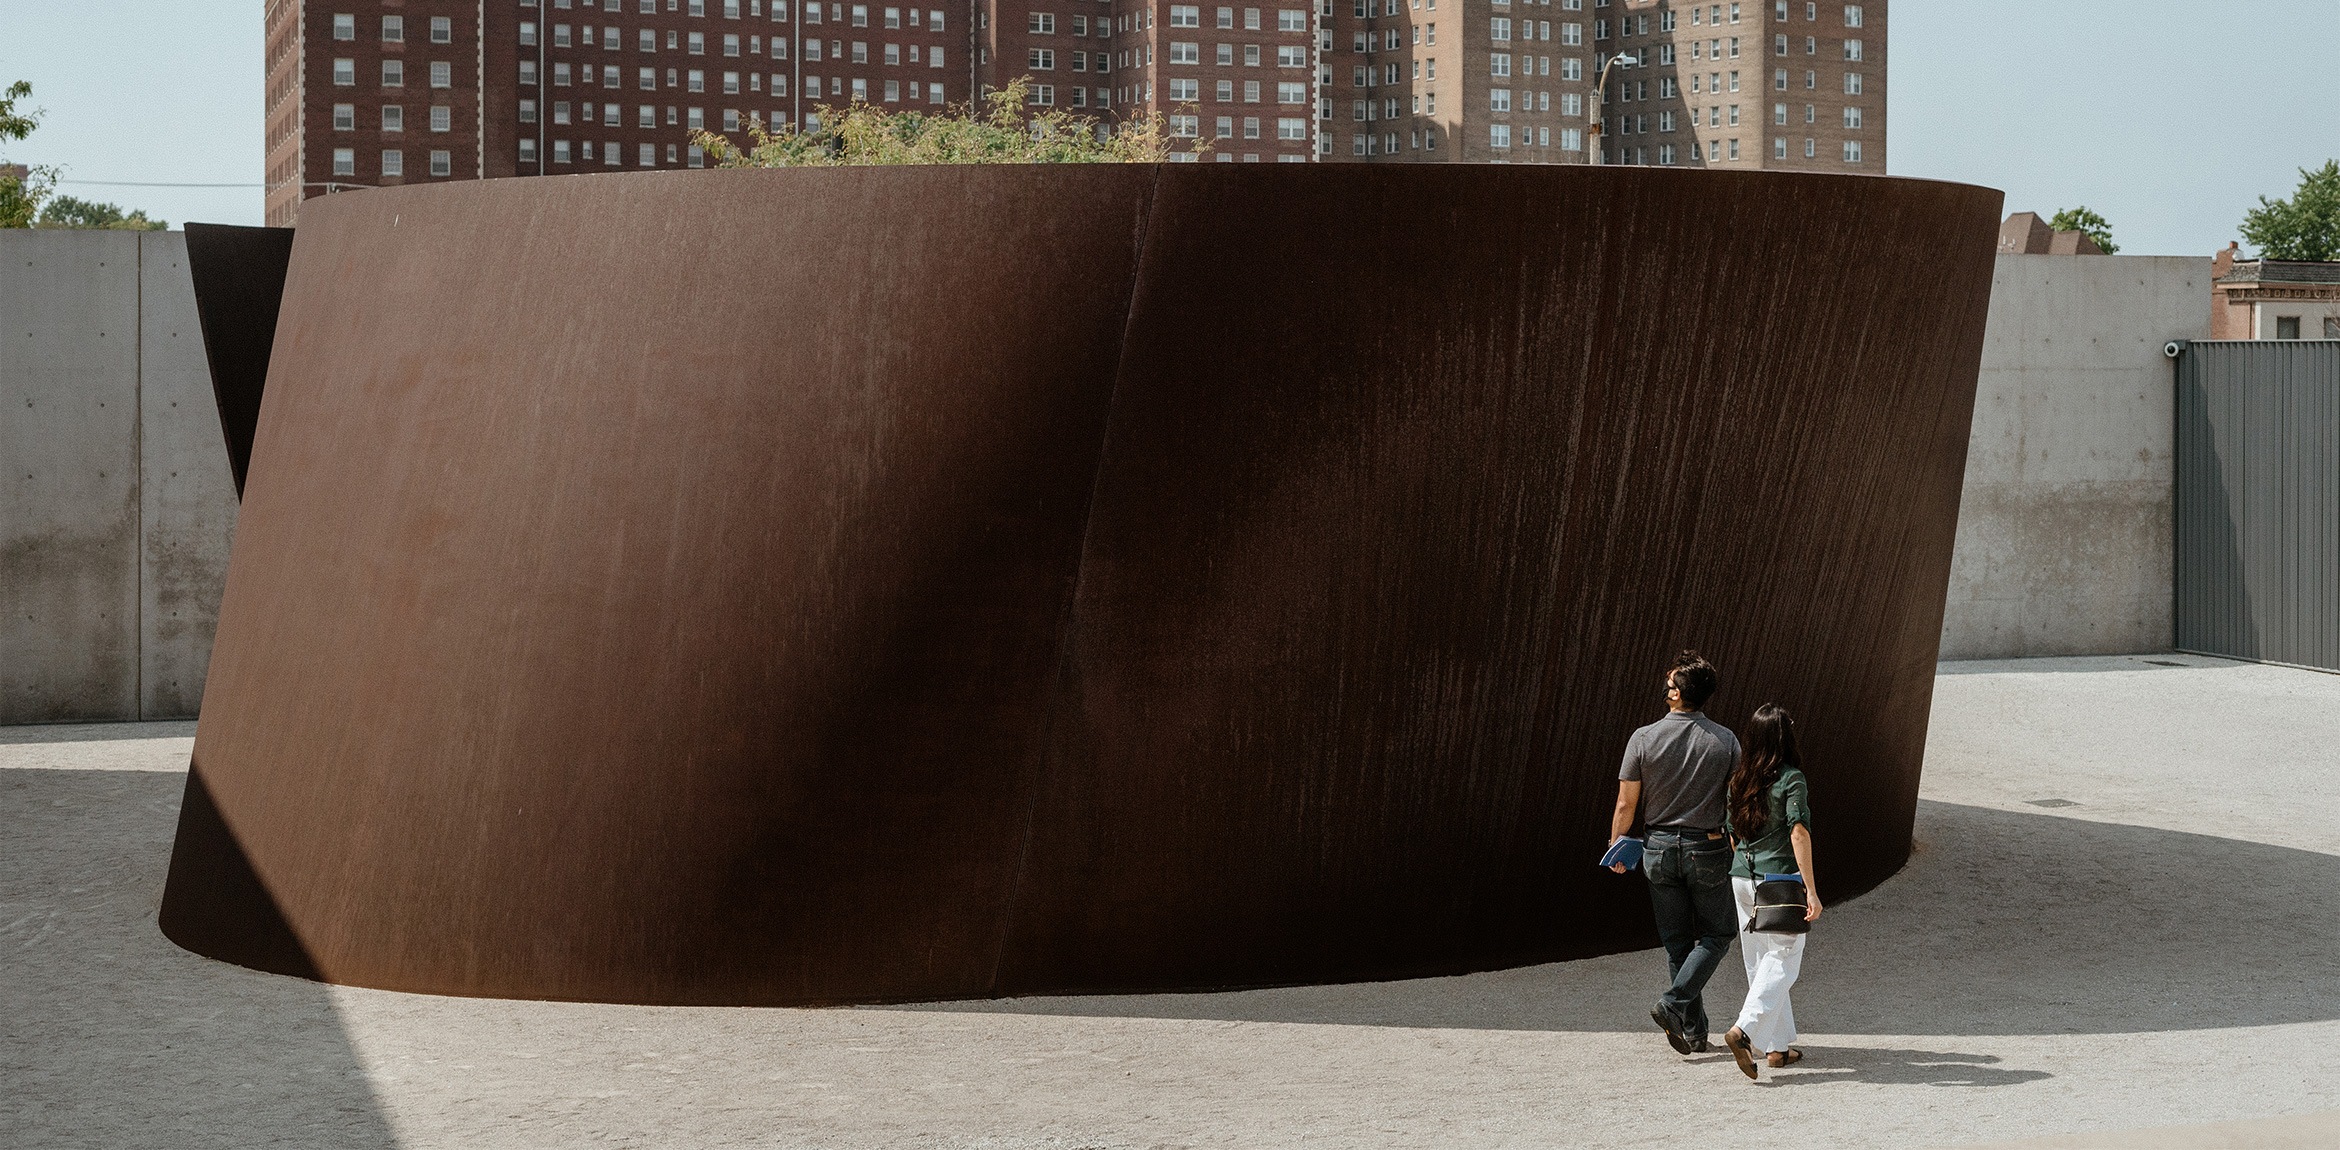 Two visitors walking around the base of Richard Serra's Joe in the museum courtyard